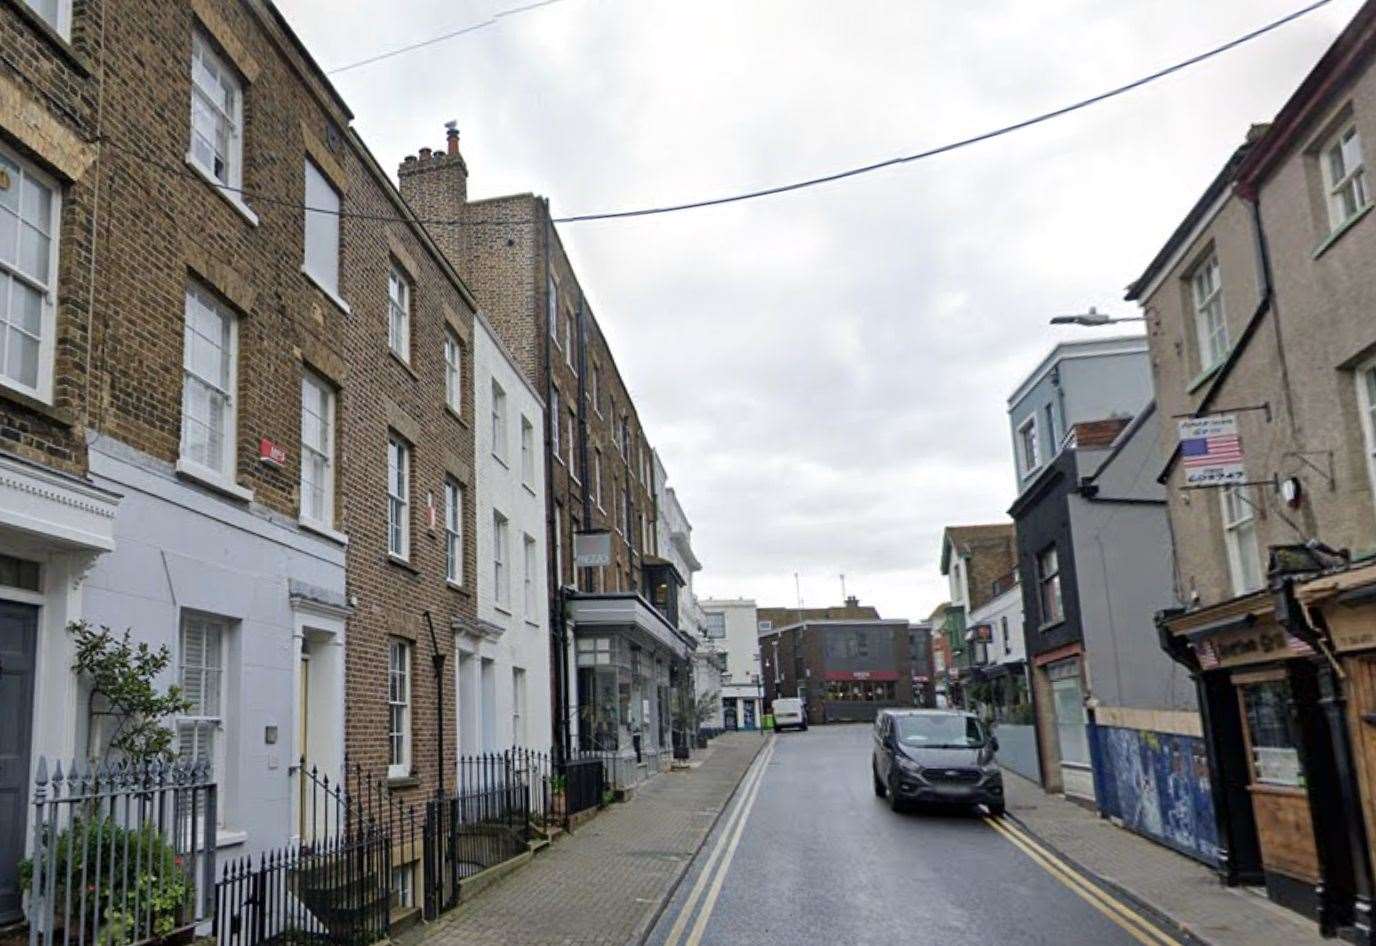 The burglary took place on Albion Street in Broadstairs